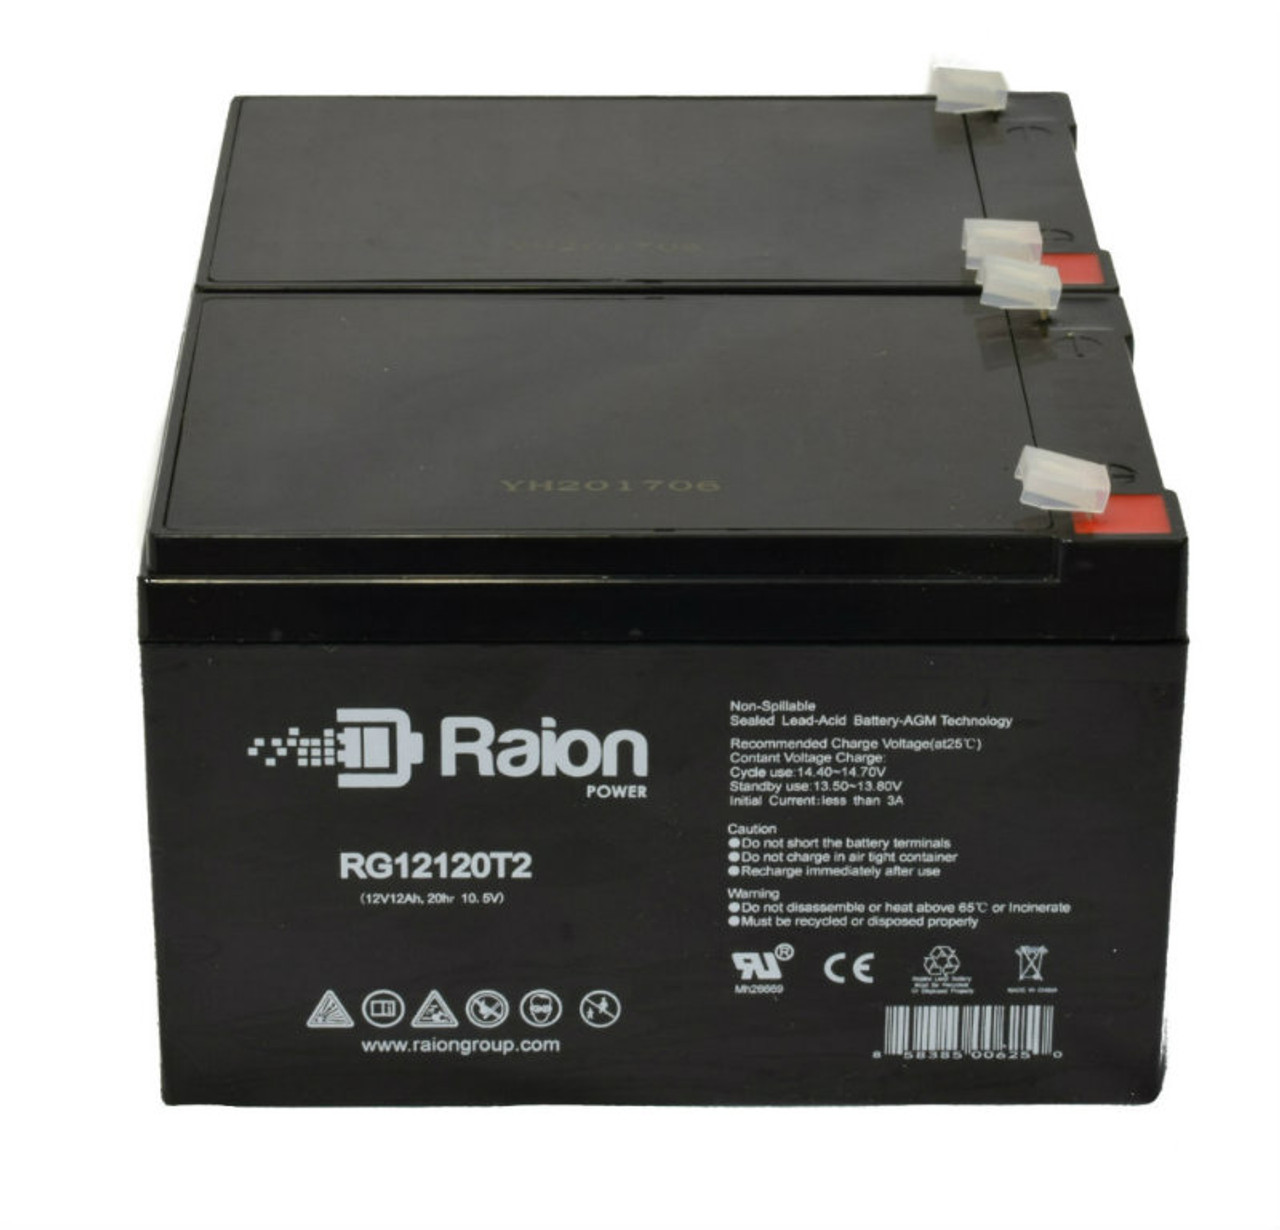 Raion Power 12V 12Ah Non-Spillable Compatible Replacement Battery for Kinghero SJ12V12Ah - (2 Pack)